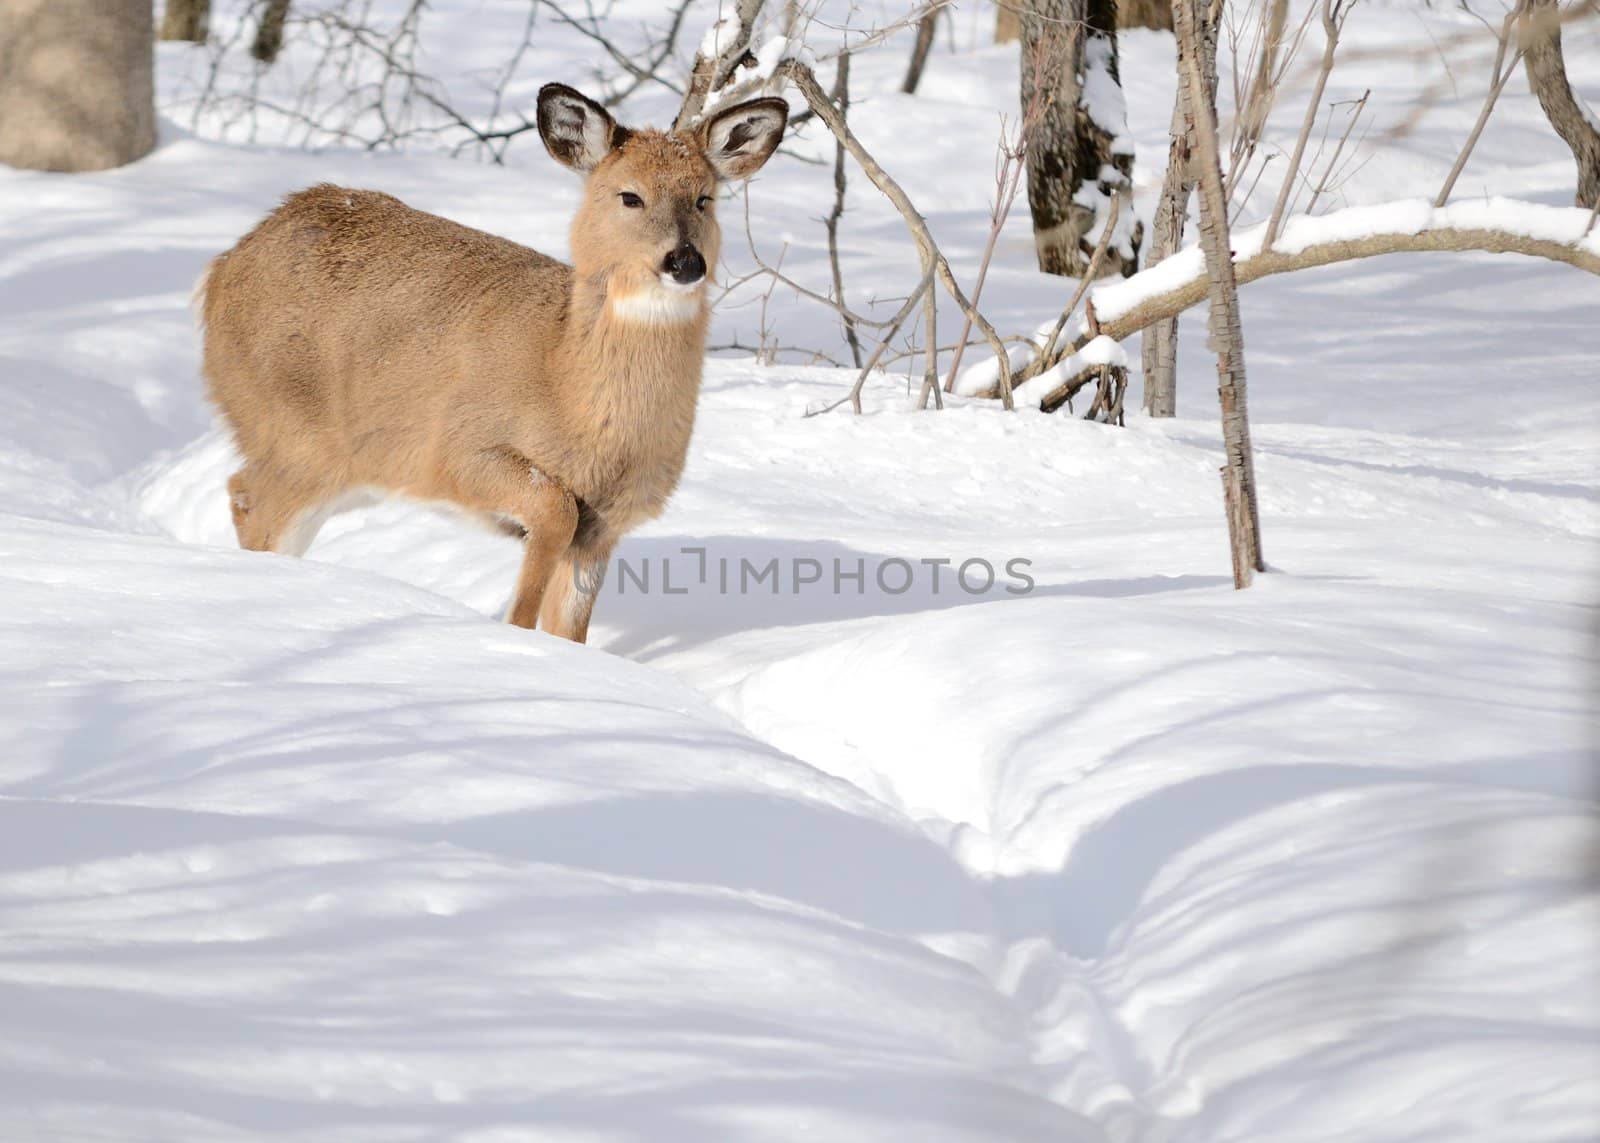 Whitetail deer yearling standing in the woods in winter snow.